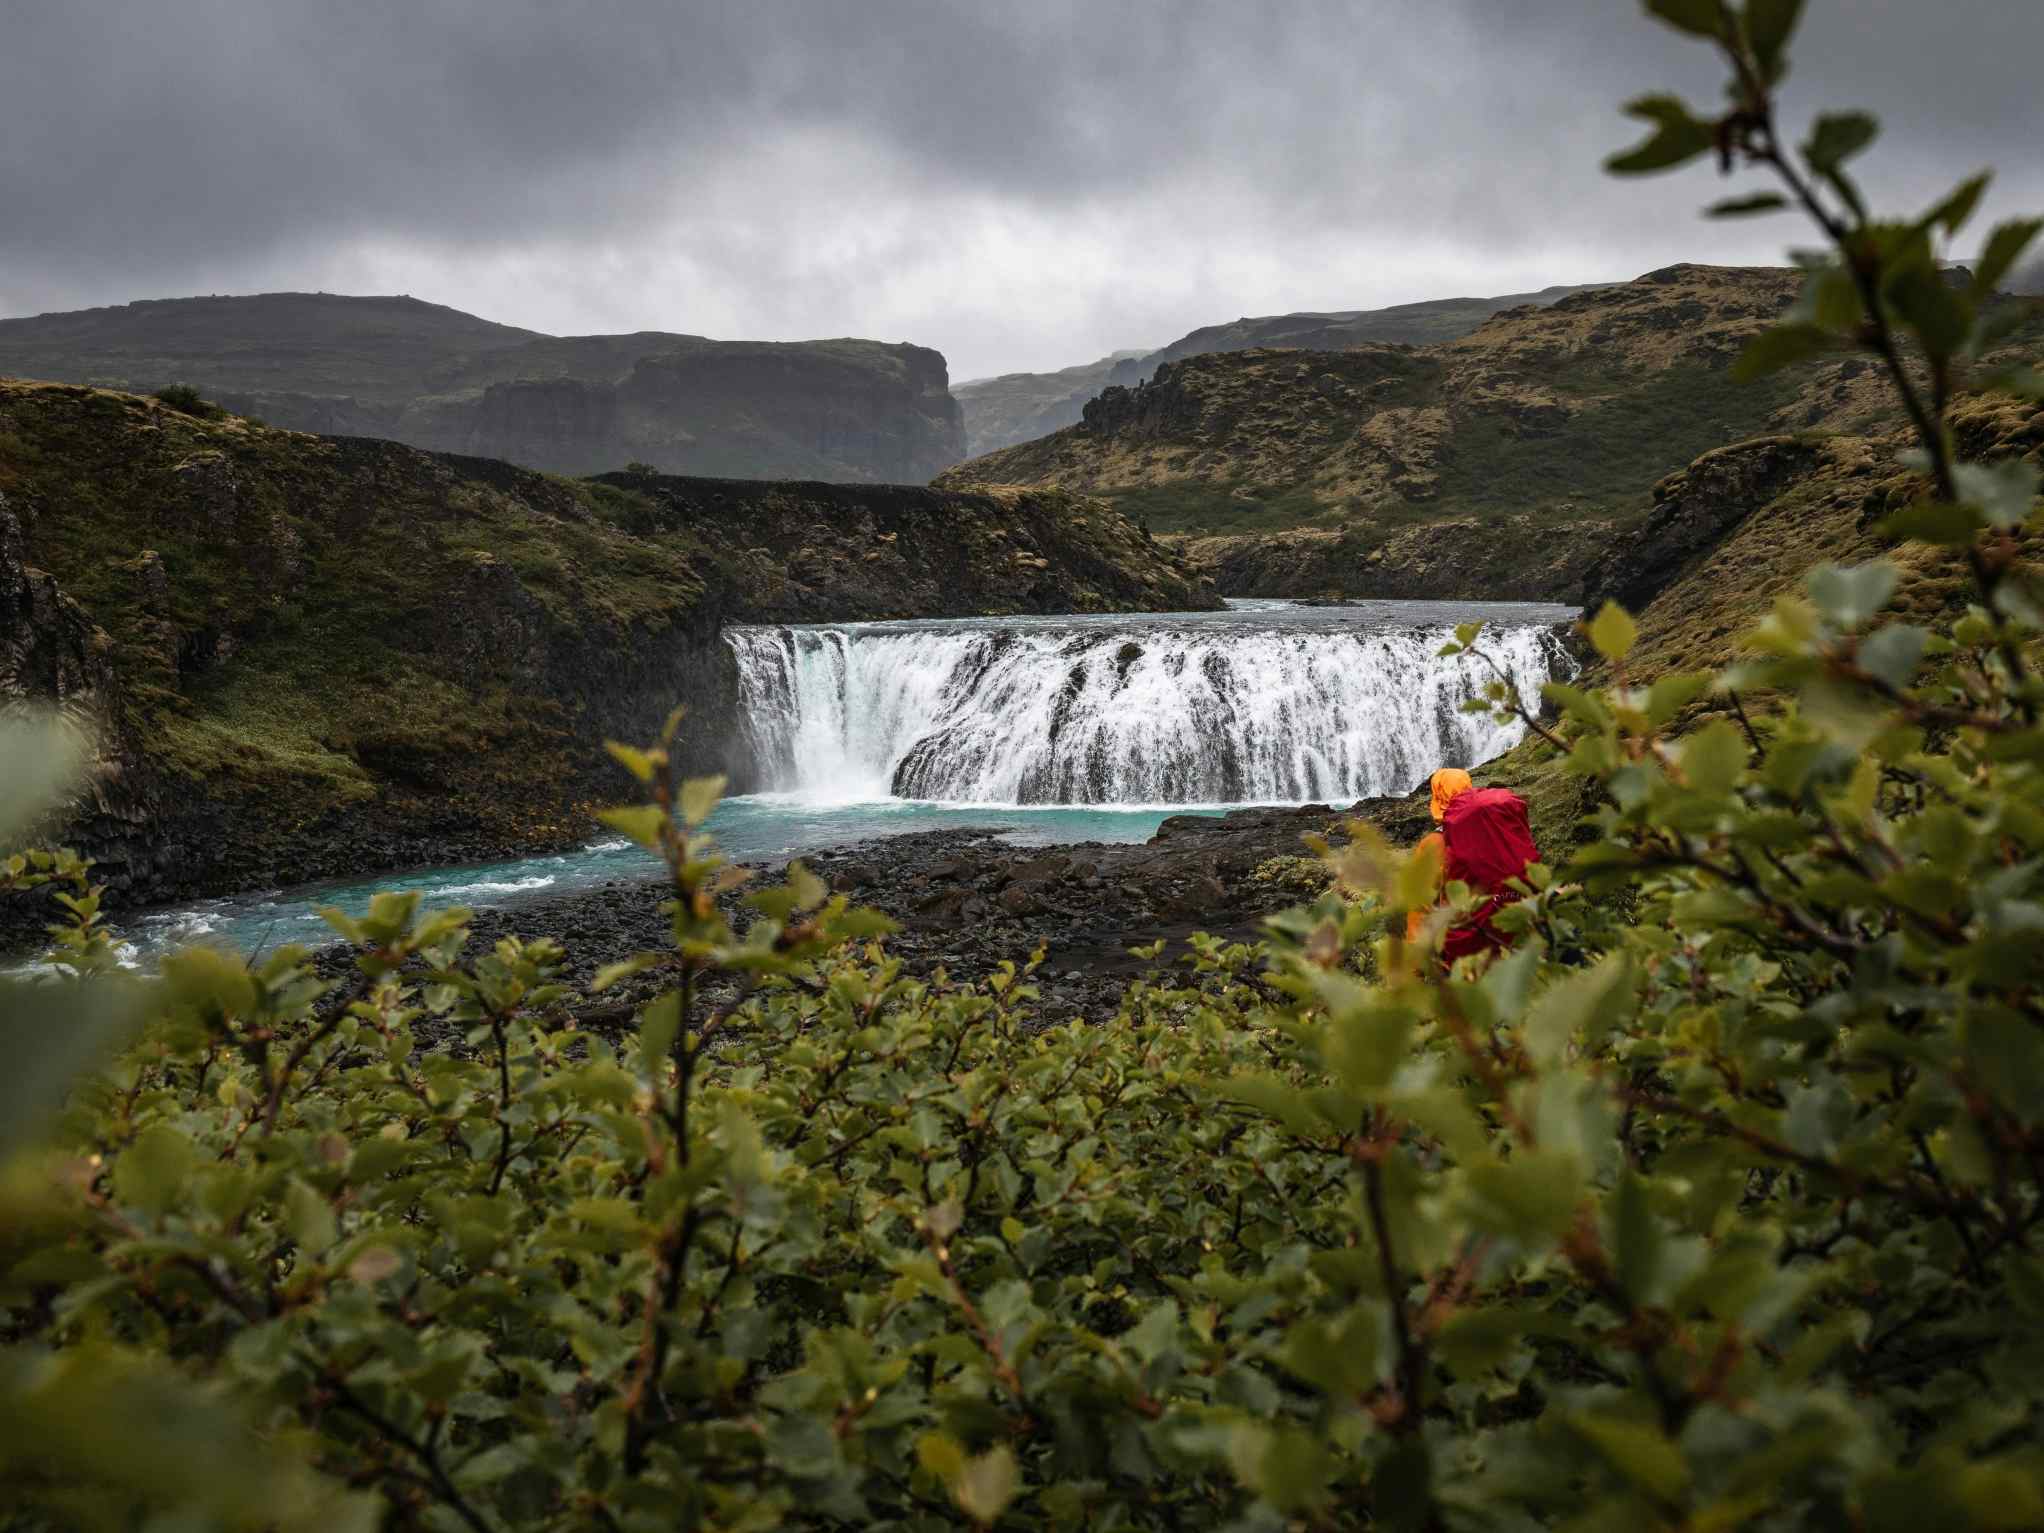 A solo hiker in Skaftafell nature reserve. Photo: Icelandic Mountain Guides.